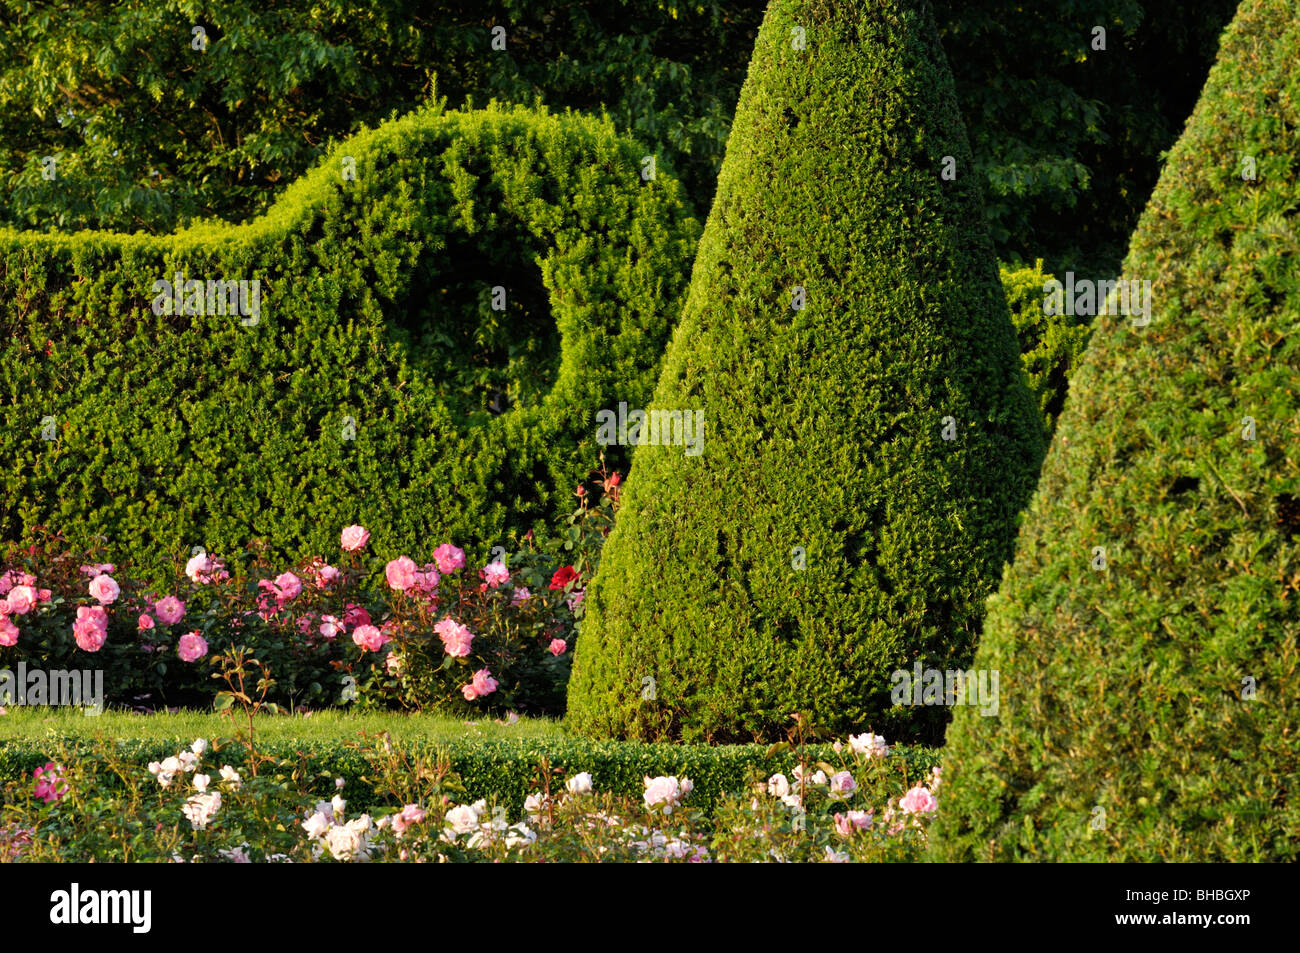 Common yew (Taxus baccata) with conical shape in a rose garden, Britzer Garten, Berlin, Germany Stock Photo